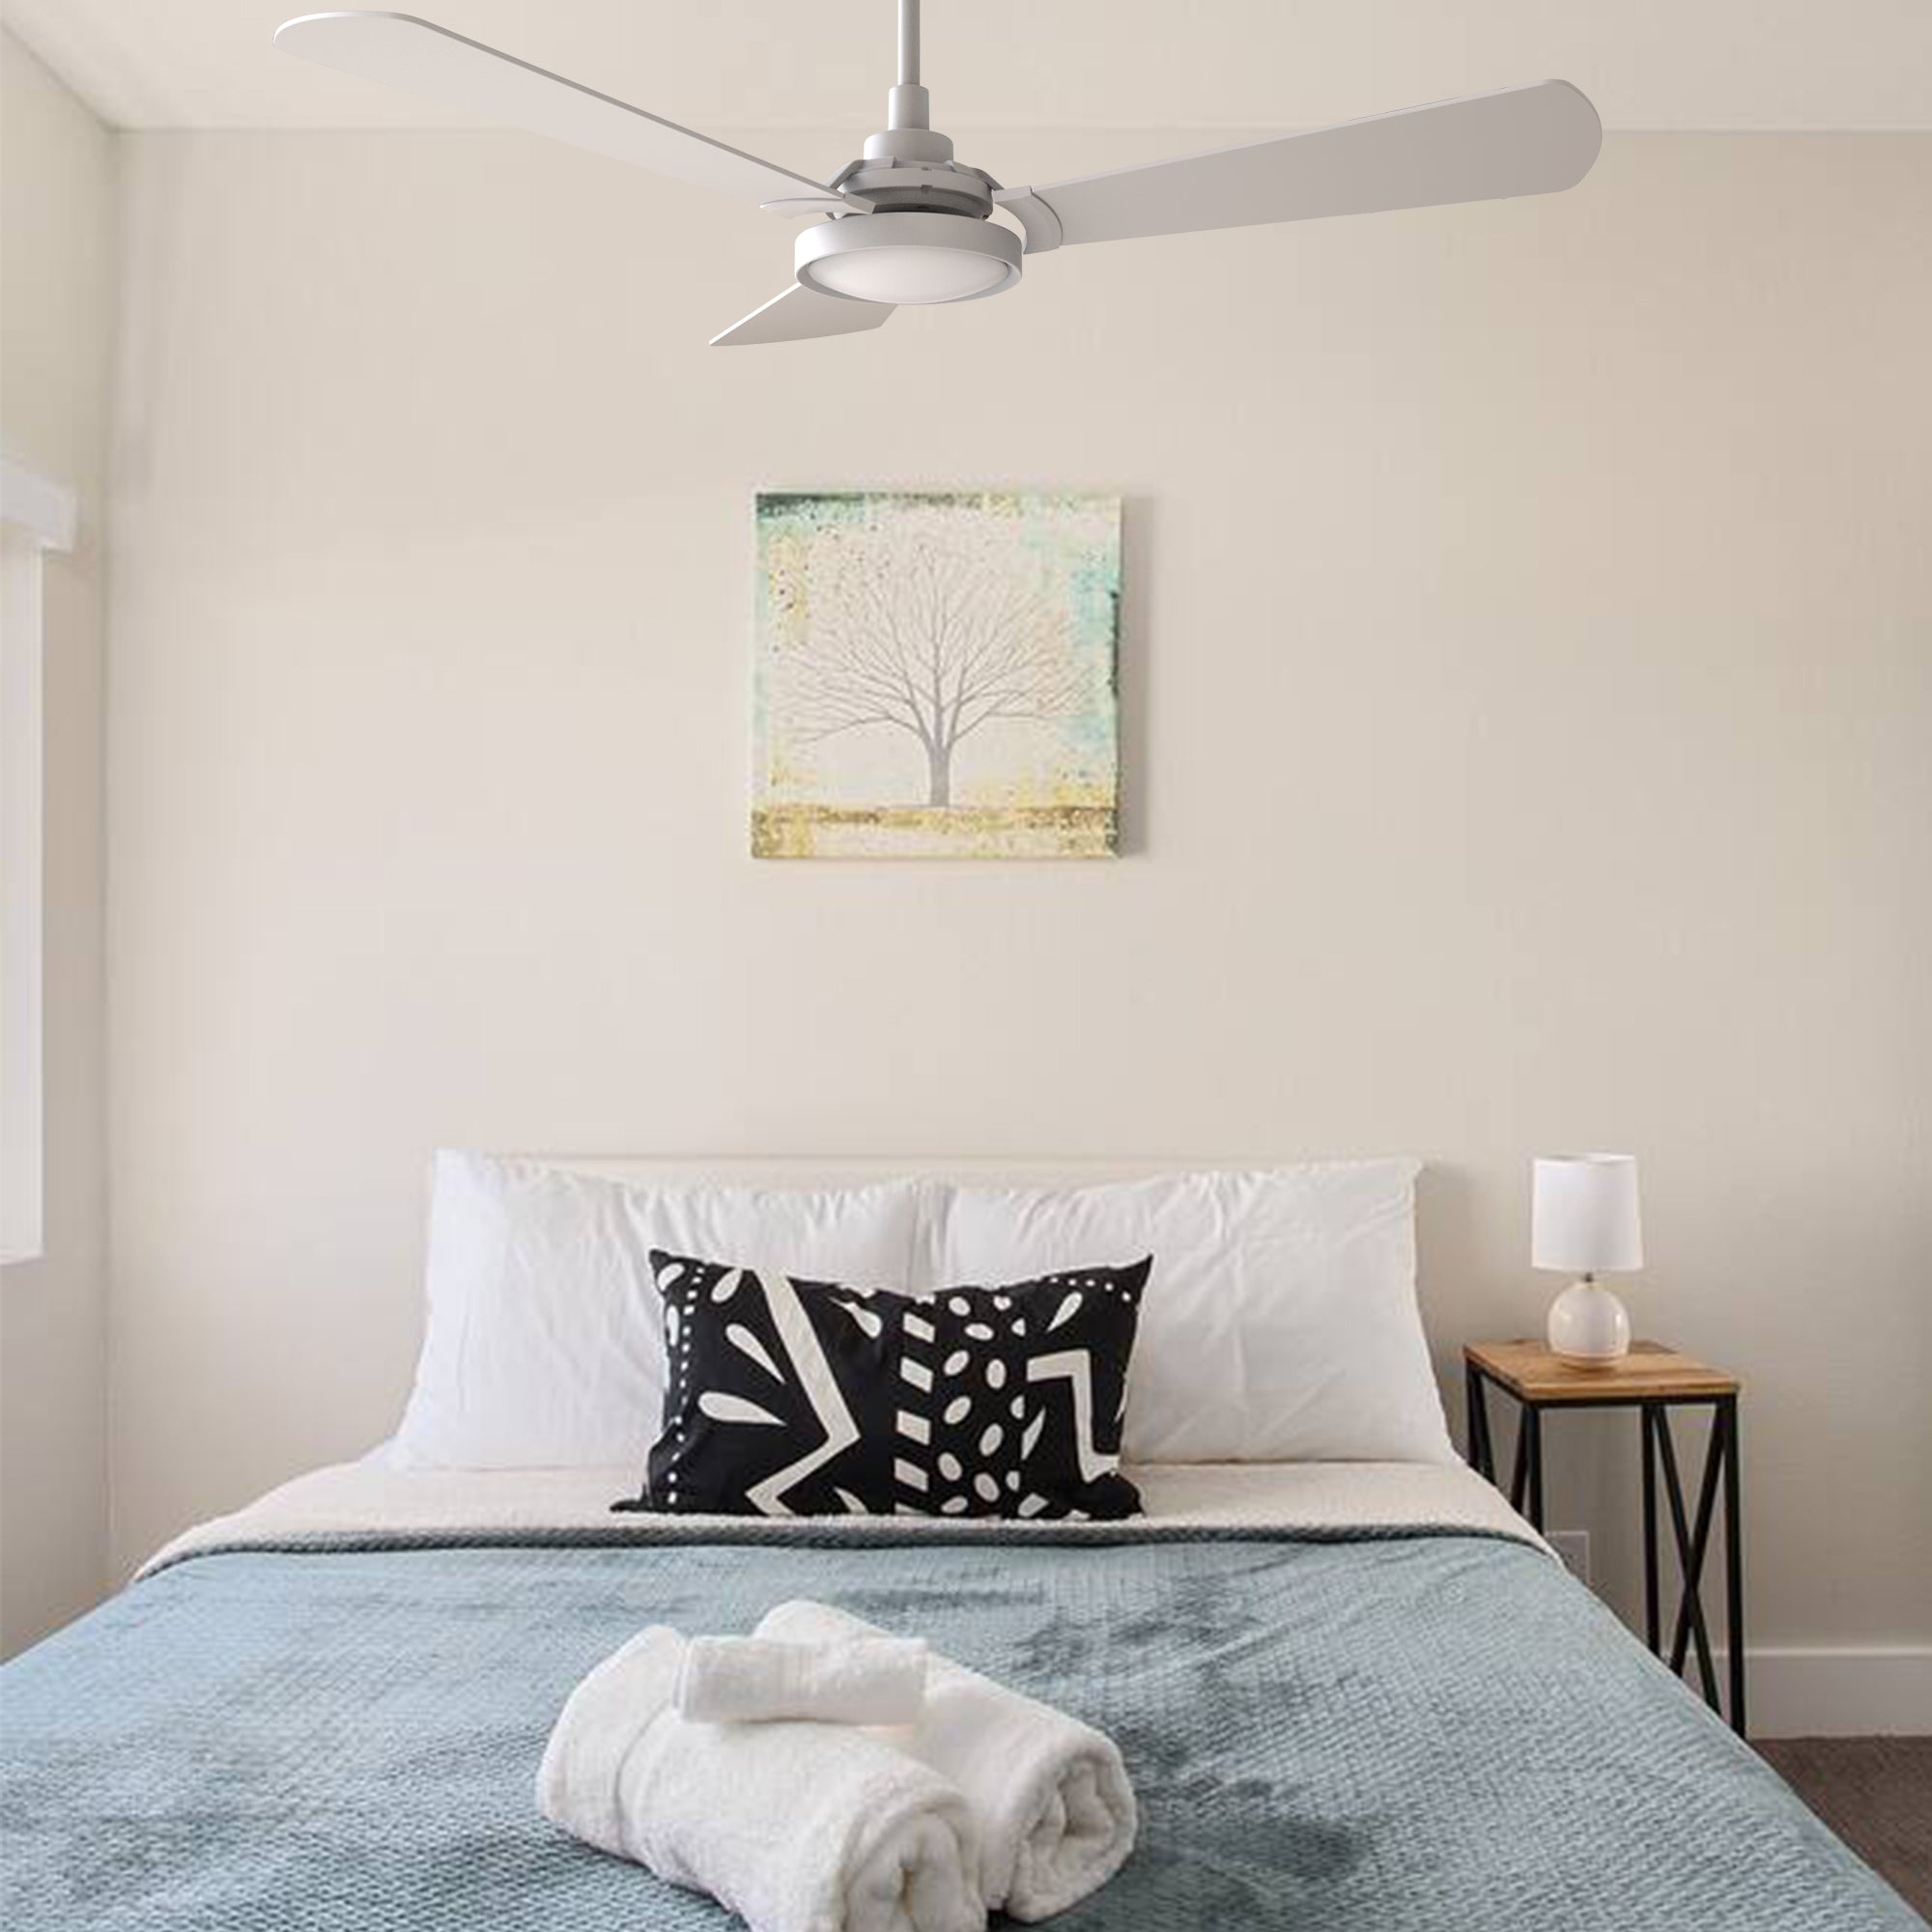 This smart ceiling fan is a simplicity designing with White finish, use elegant Plywood blades, Glass shade and has an integrated 4000K LED daylight. The fan features Remote control, Wi-Fi apps, Siri Shortcut and Voice control technology (compatible with Amazon Alexa and Google Home Assistant ) to set fan preferences. 